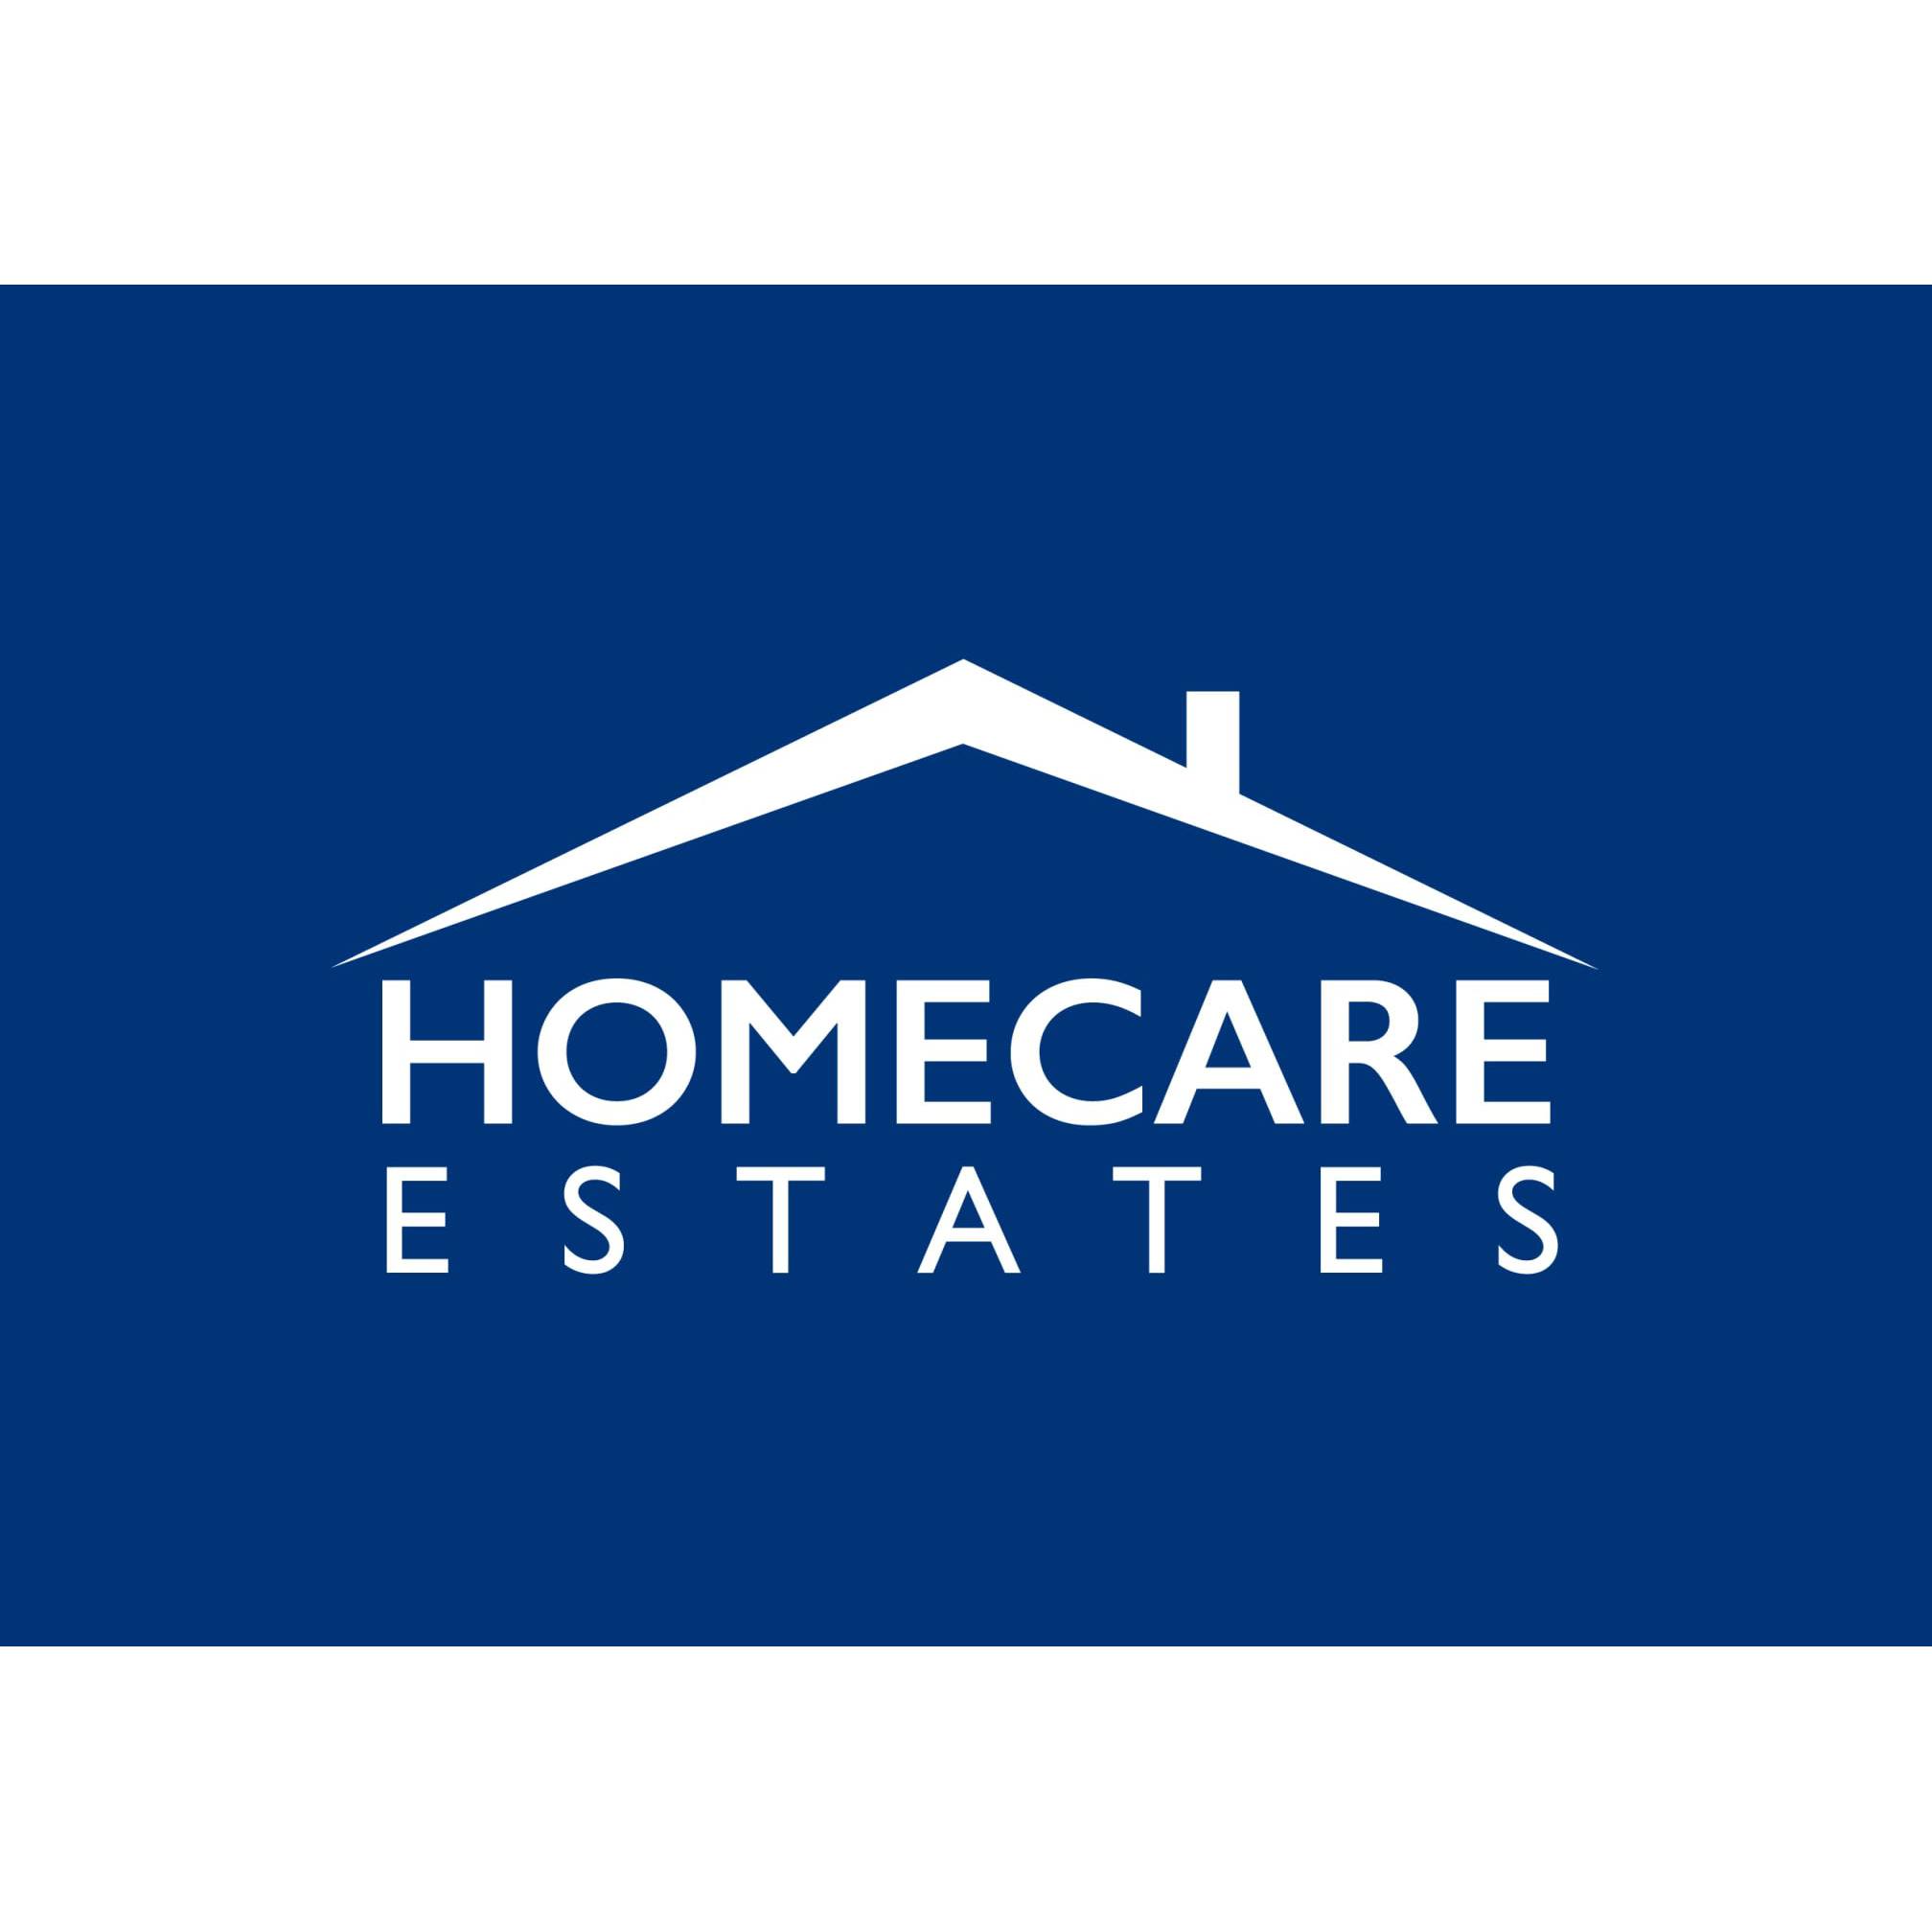 Homecare Estates- Sales and Lettings Agent in Wallington Logo